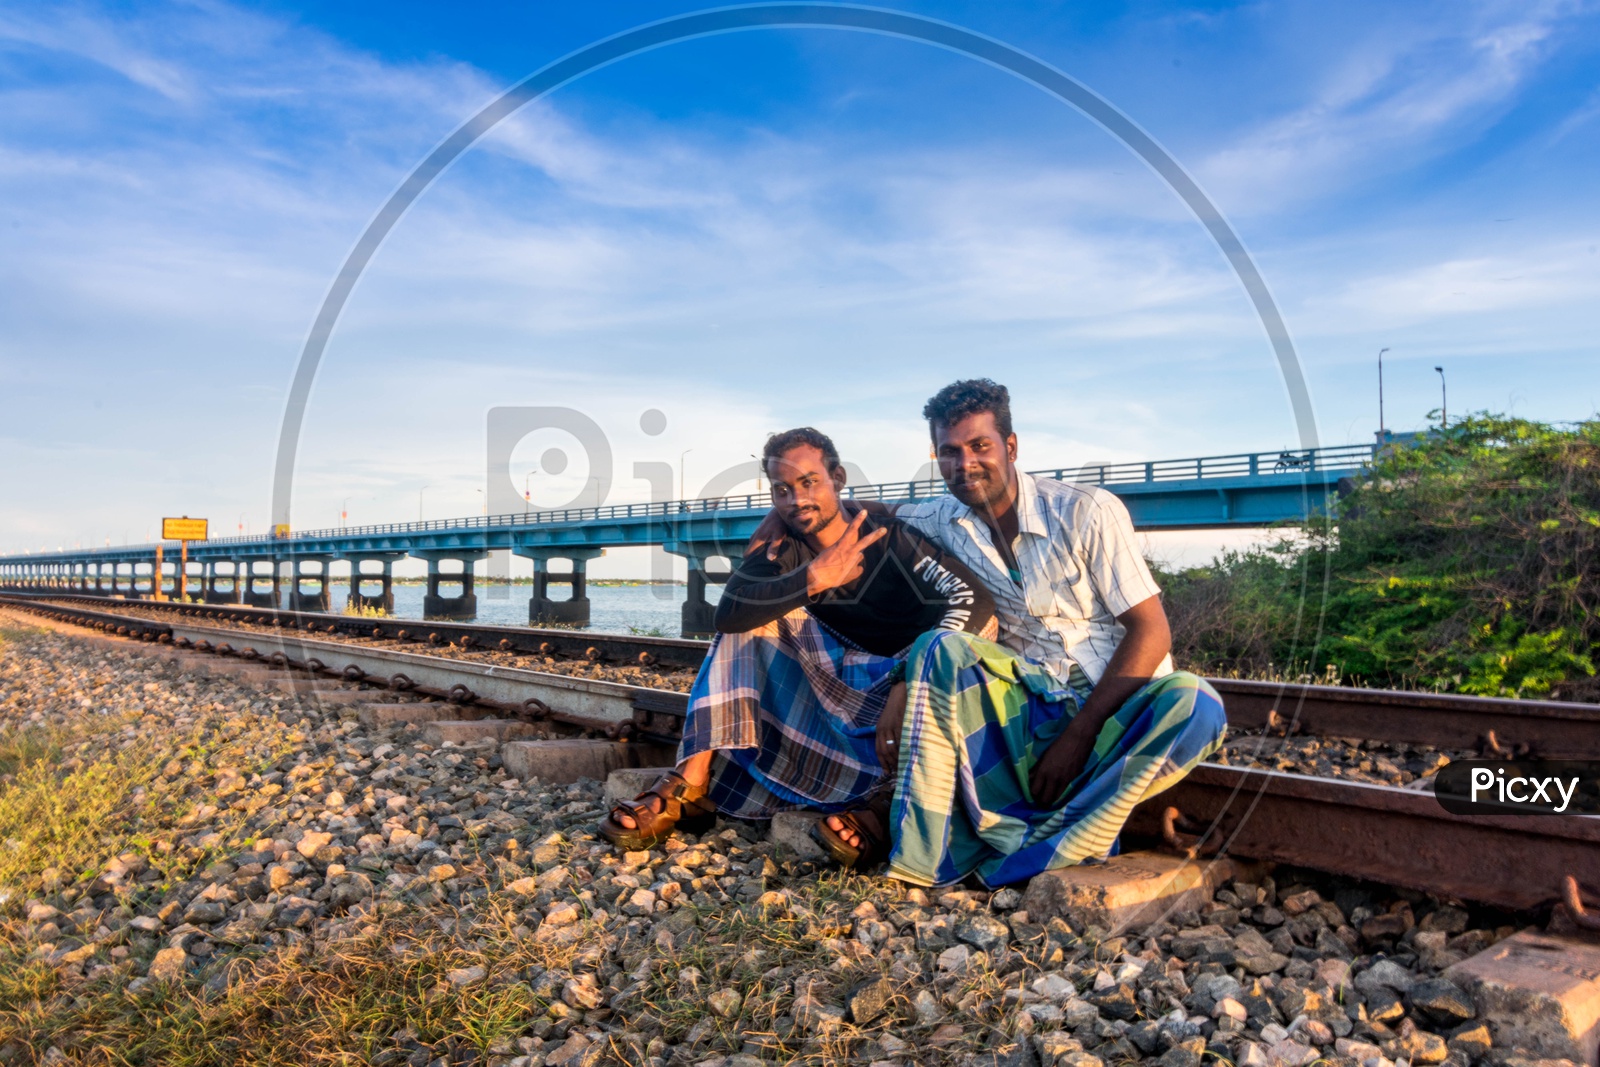 Photoshoot At Railway Track // Best Photoshoot Place For Instagram Photos  // - YouTube